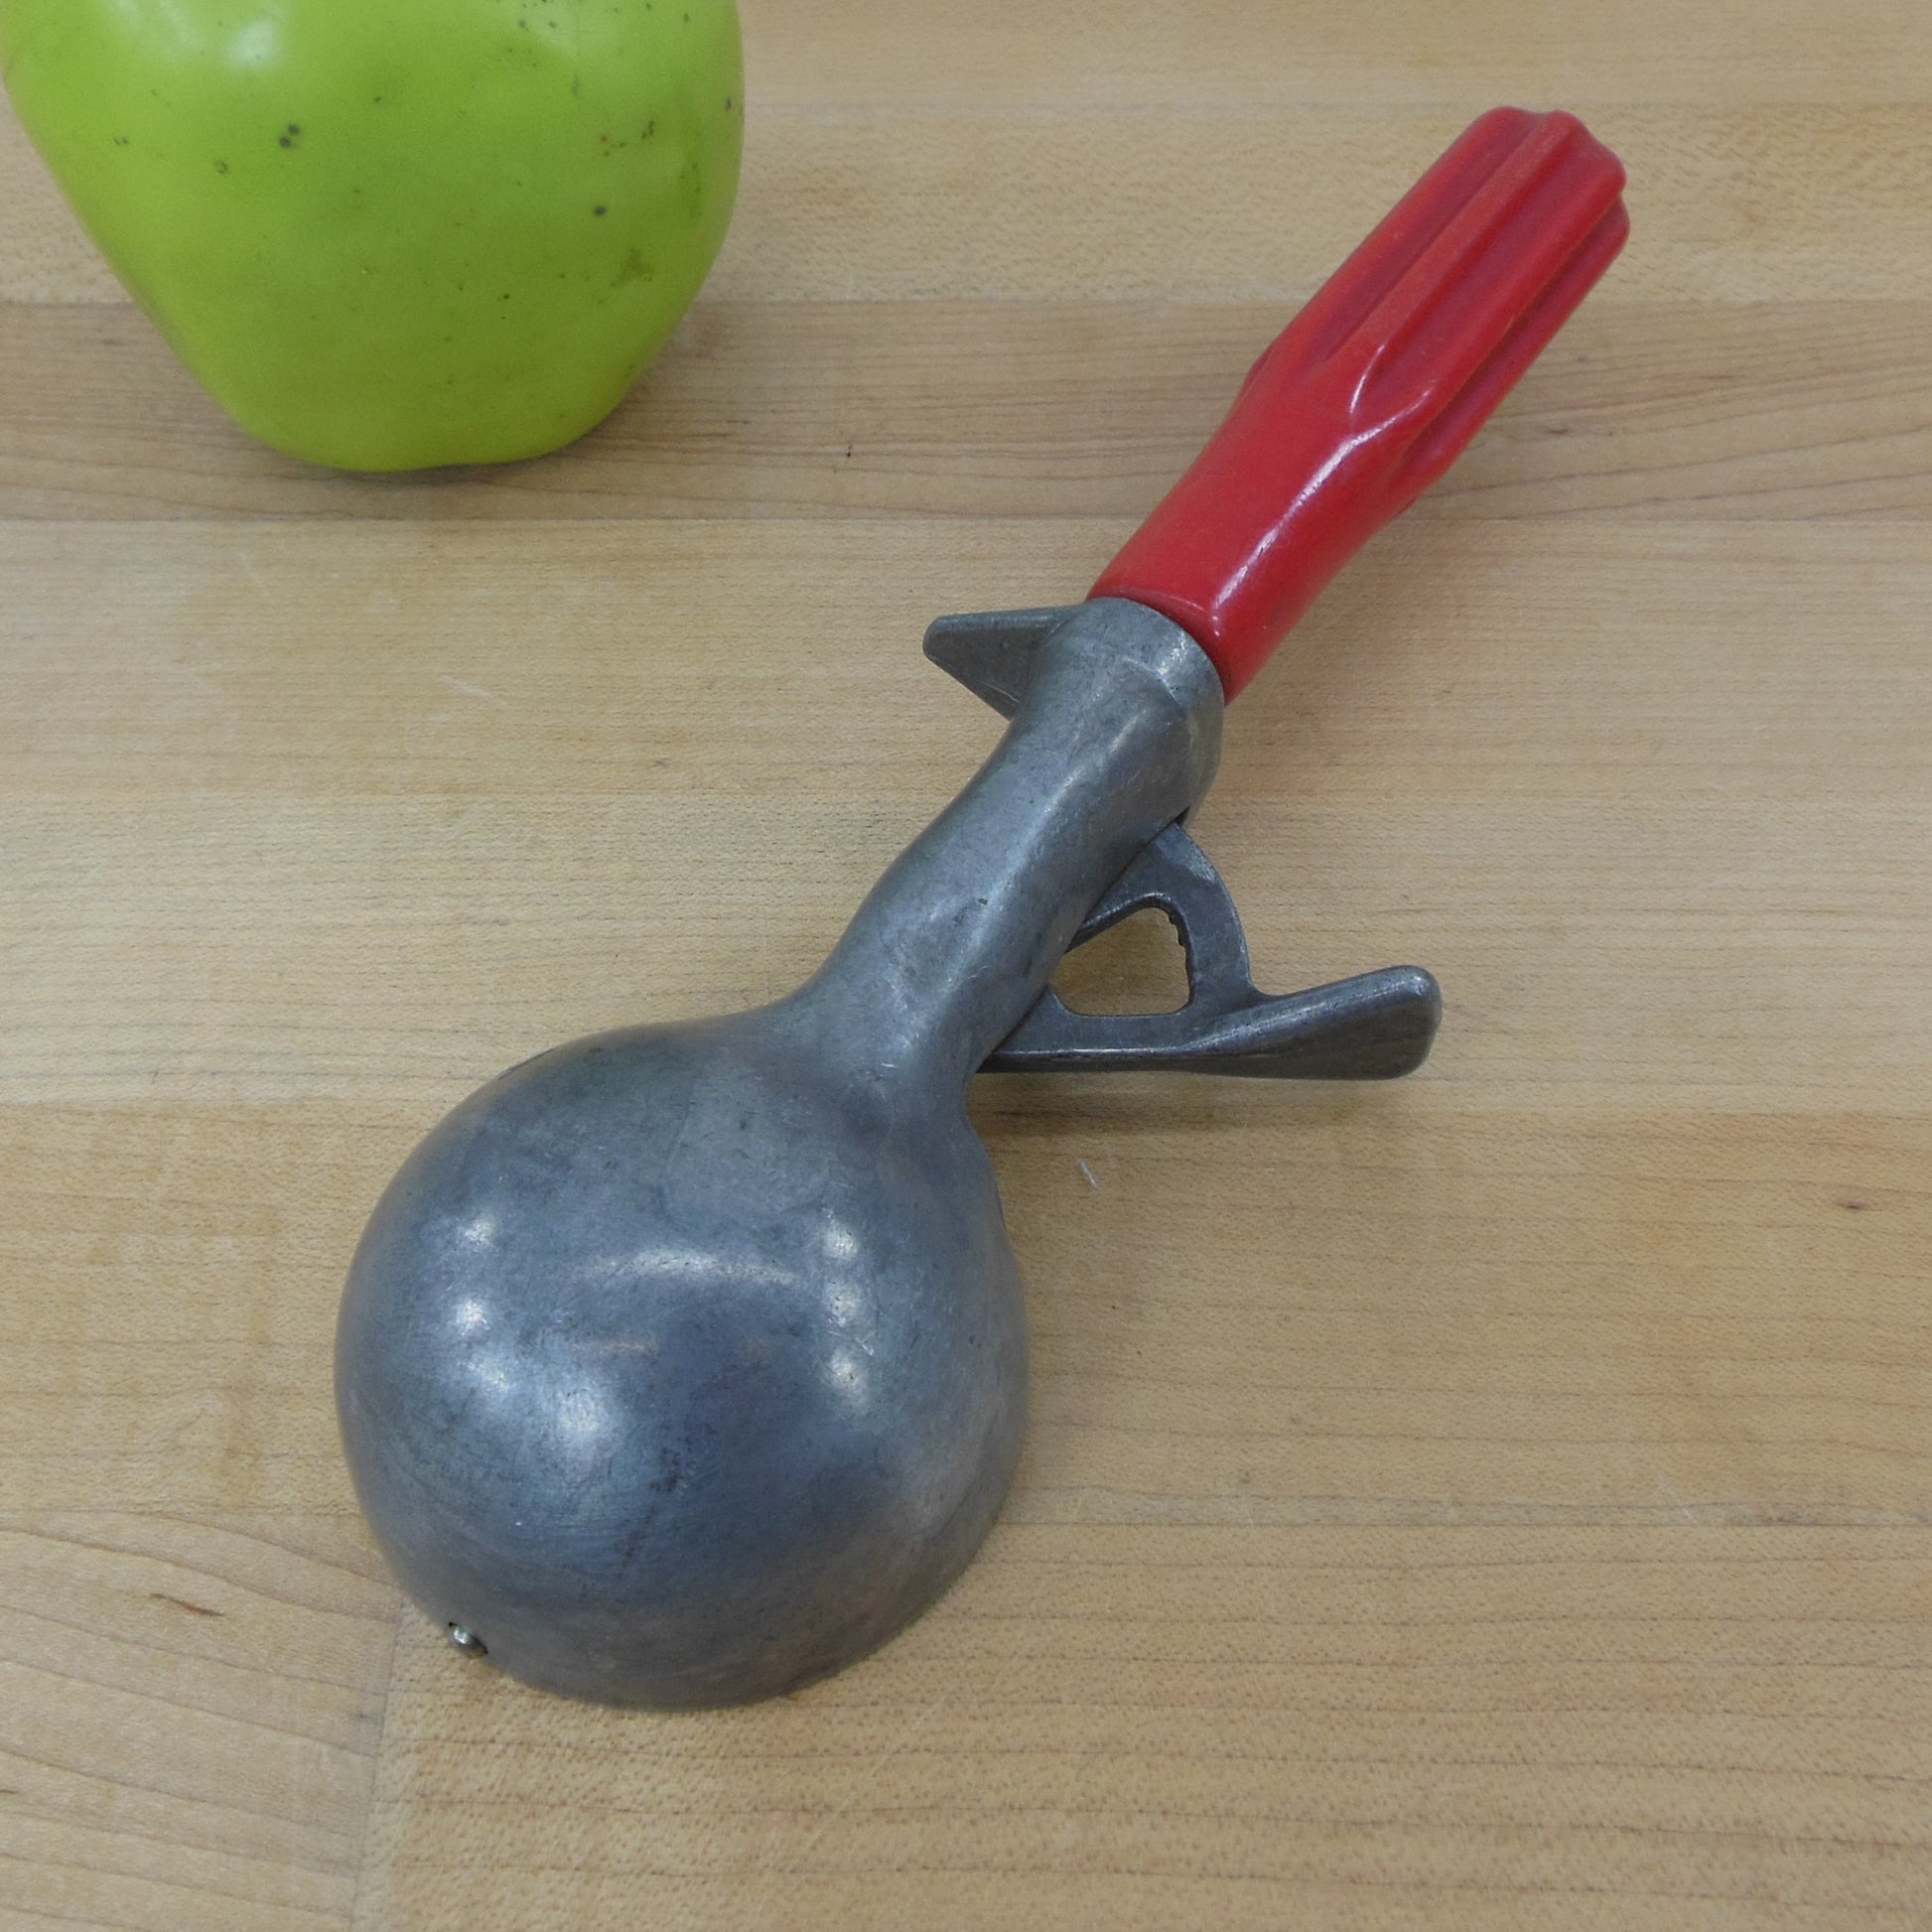 Vintage Ice Cream Scoop With Red White Black or Metal Handle -  Sweden